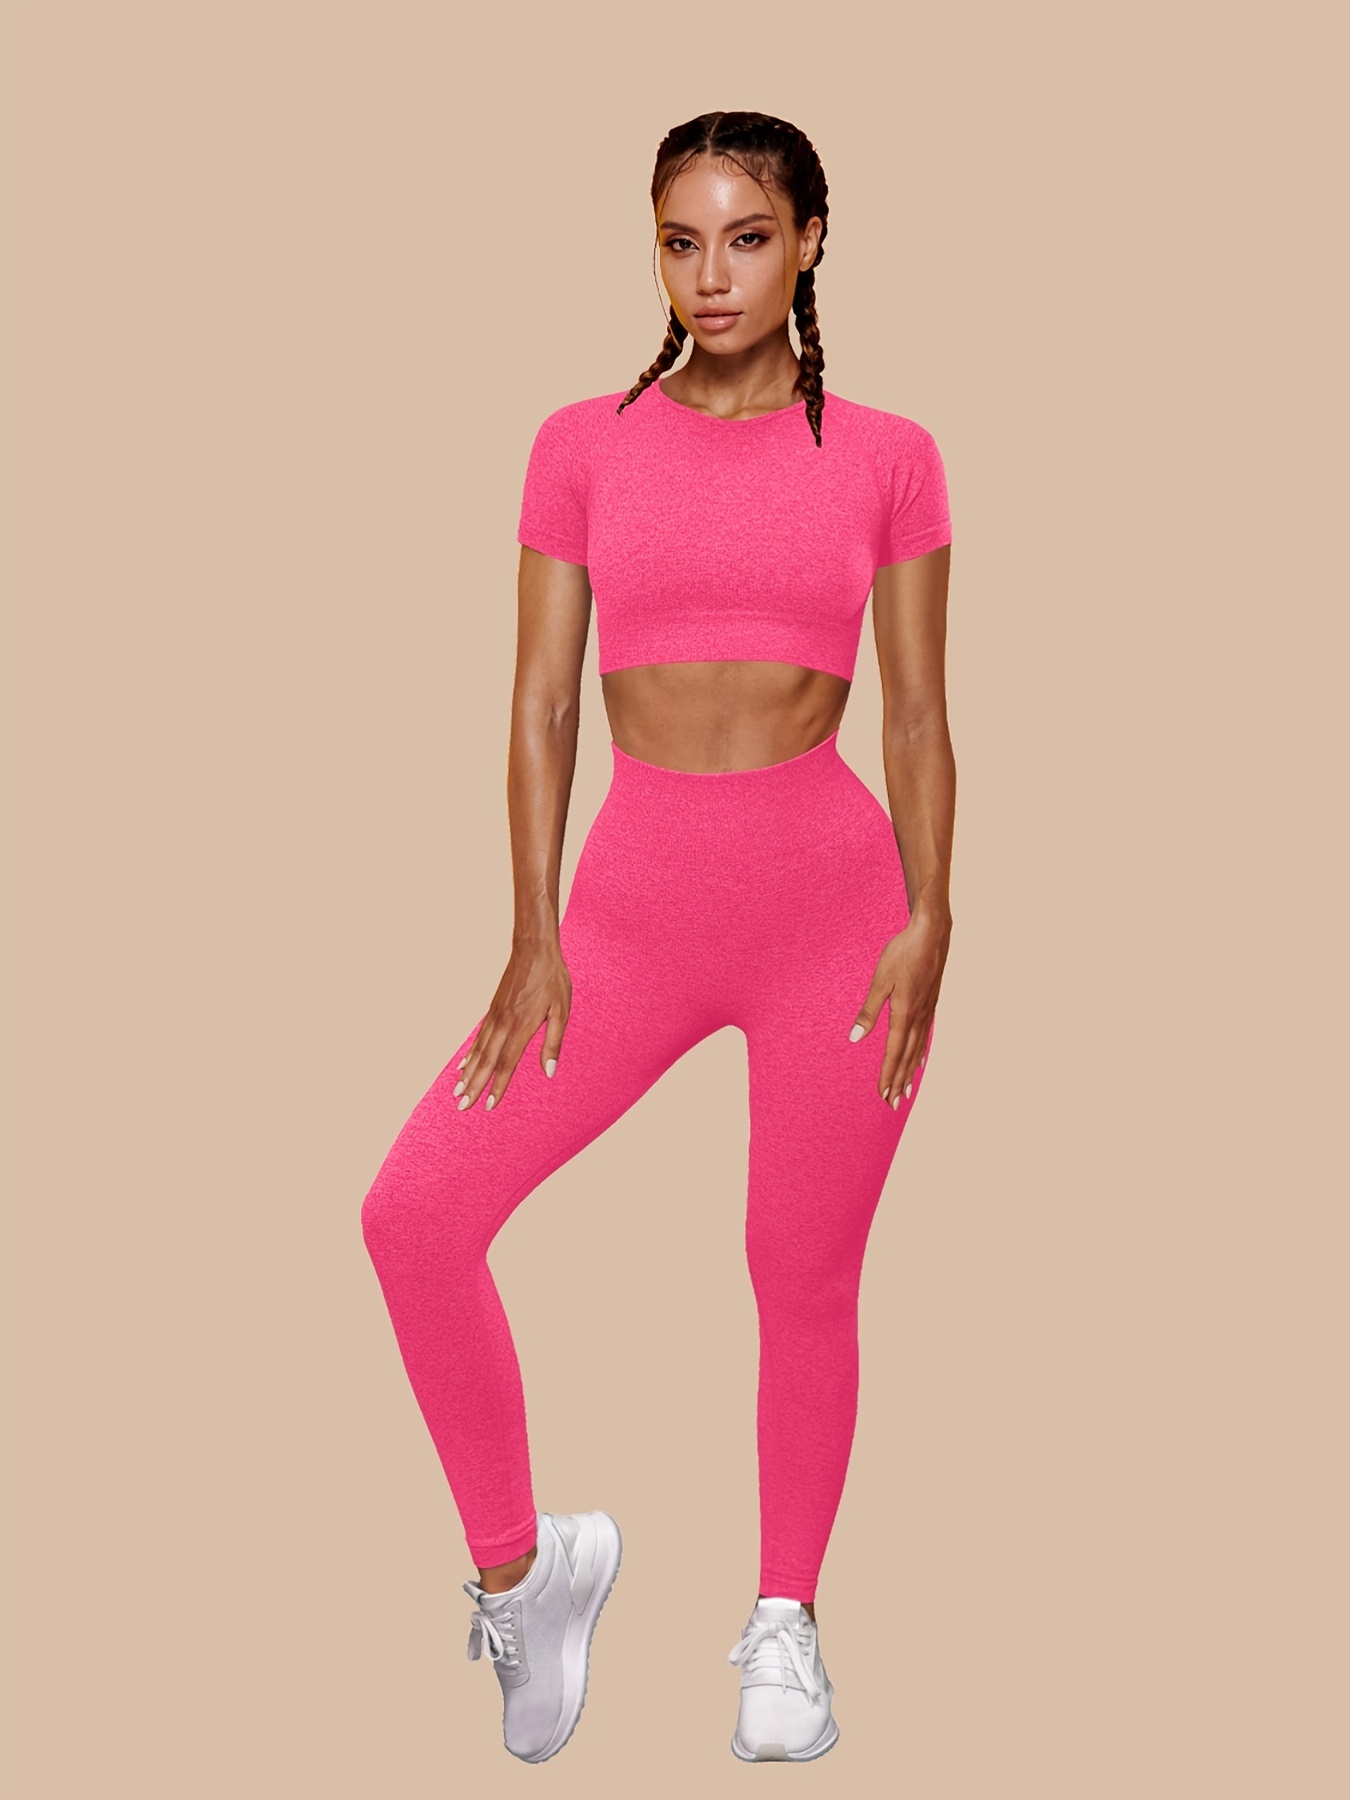 Womens Yoga Leggings Top Set Cropped Bra And Long Pant Fitness Sport Suit  For Tummy Control And Workout From Cbaoyu, $12.8